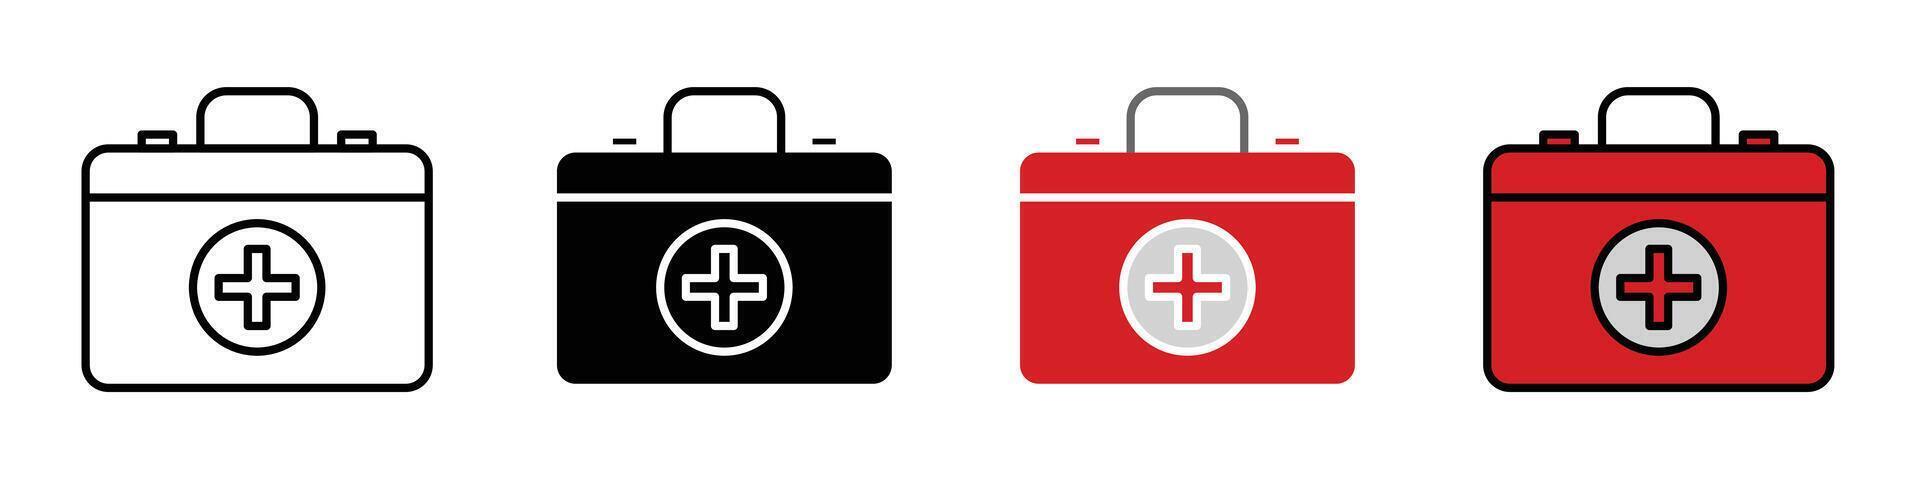 First aid box icon vector